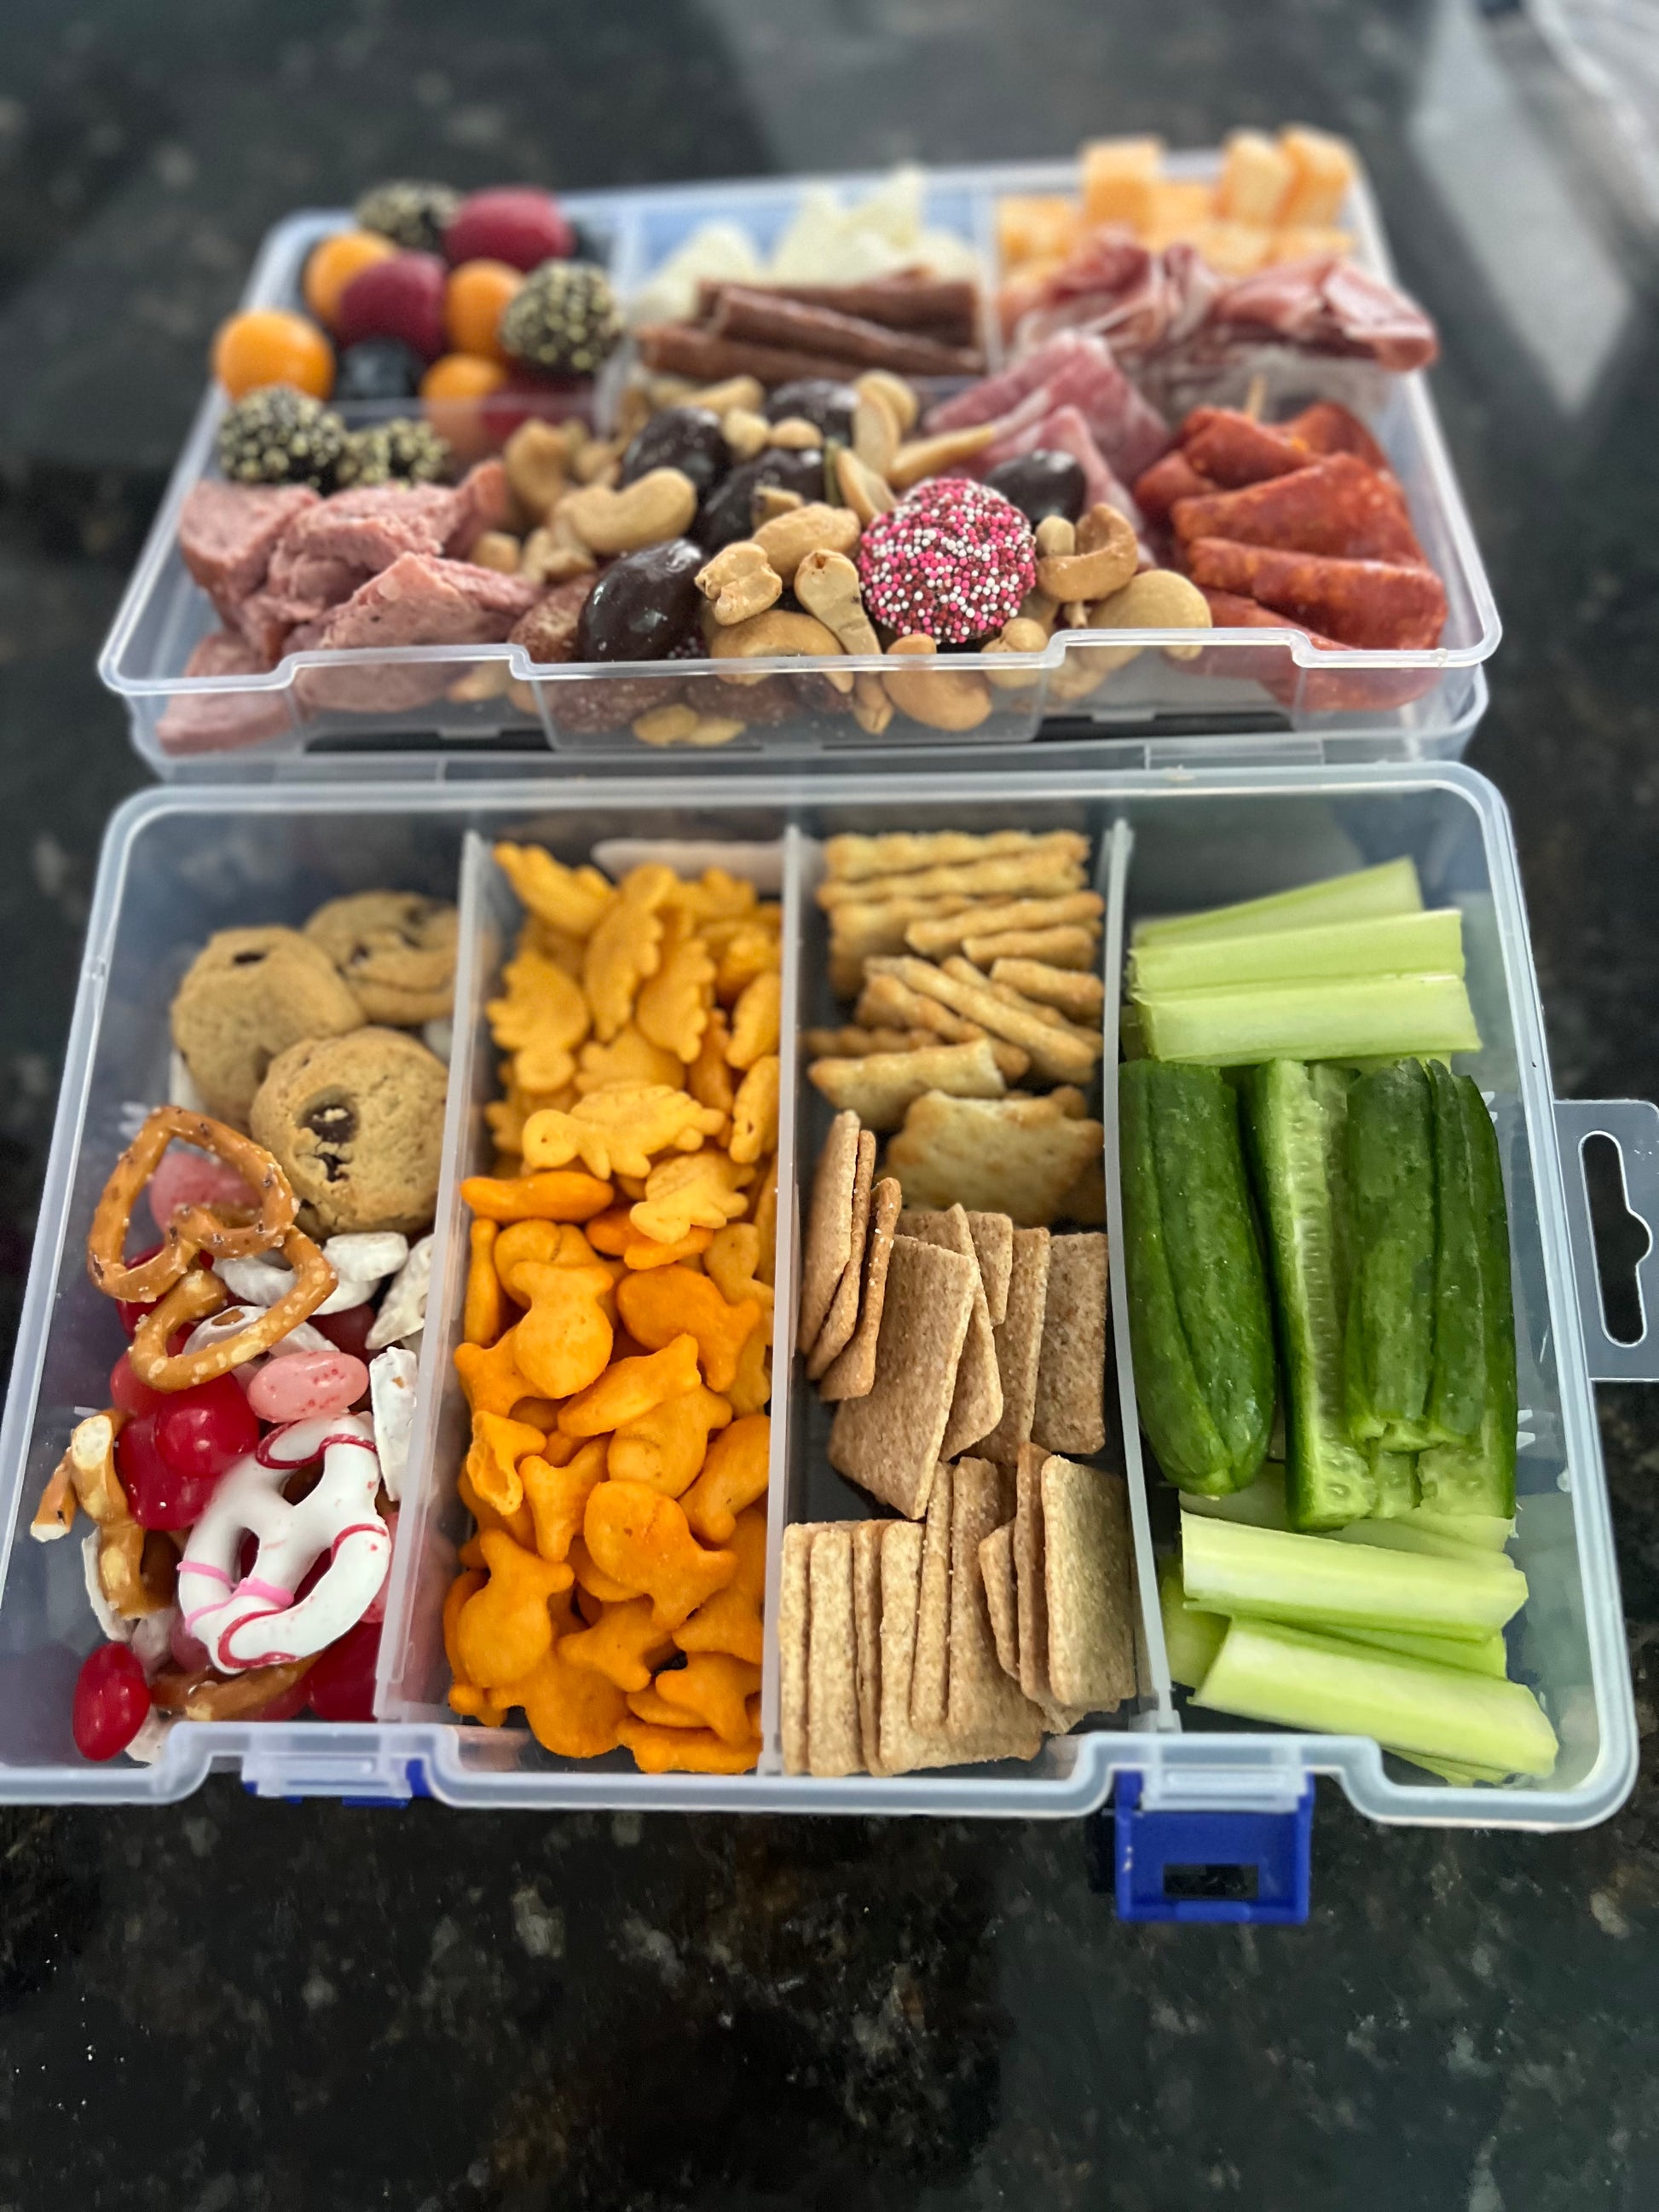 Charcuterie on the Go,snack Box, Snackle Box, Charcuterie Box